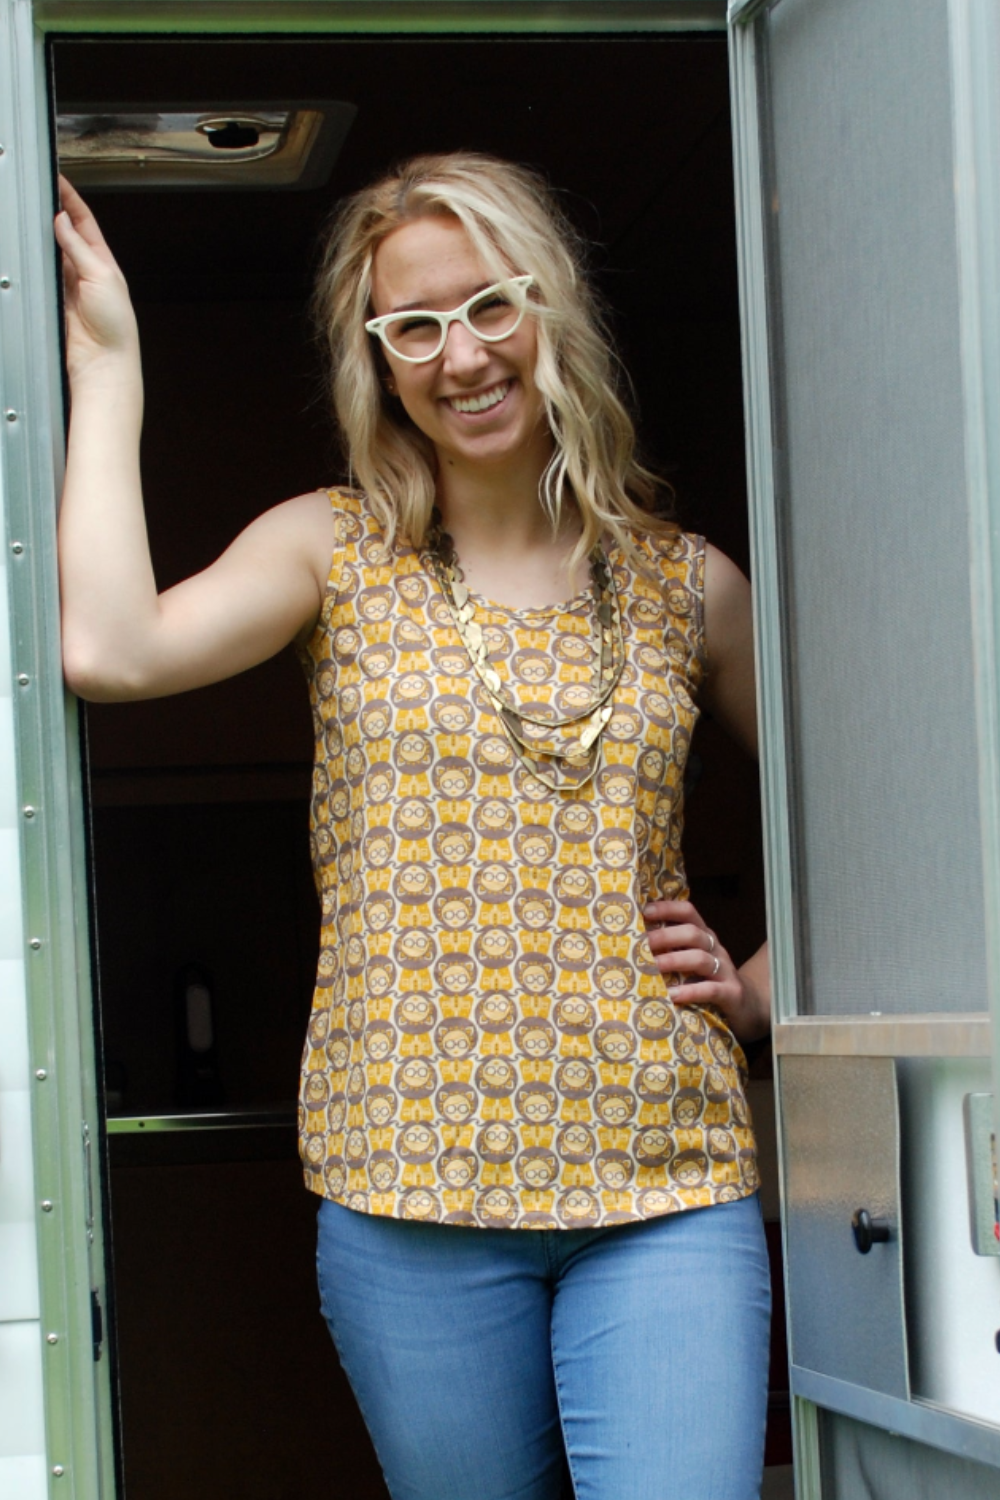 Cute girl wearing glasses and sleeveless yellow and grey girl print top, standing in the door of a camper